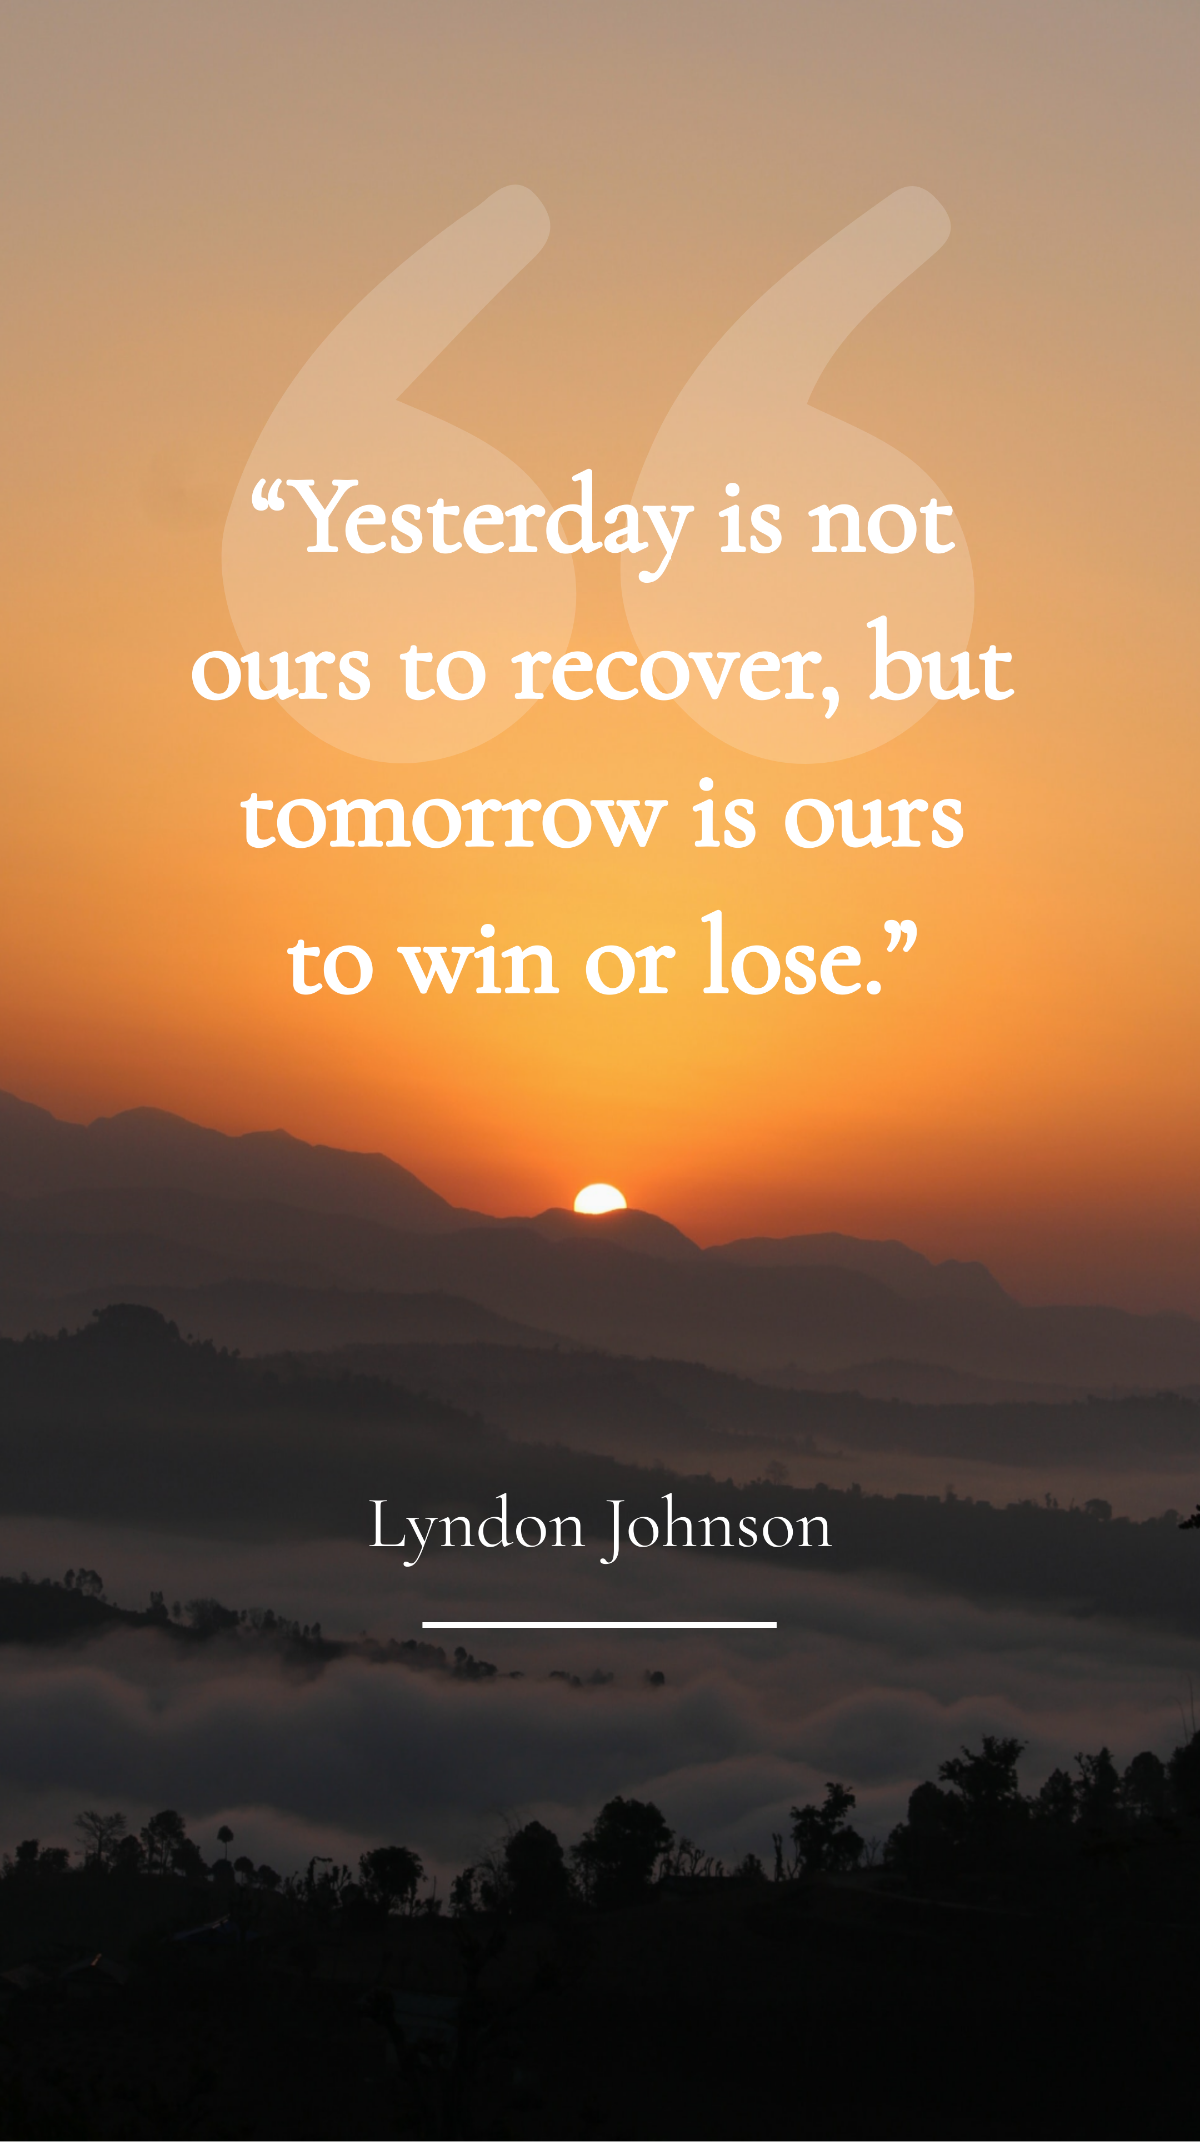 Lyndon Johnson - “Yesterday is not ours to recover, but tomorrow is ours to win or lose.” Template